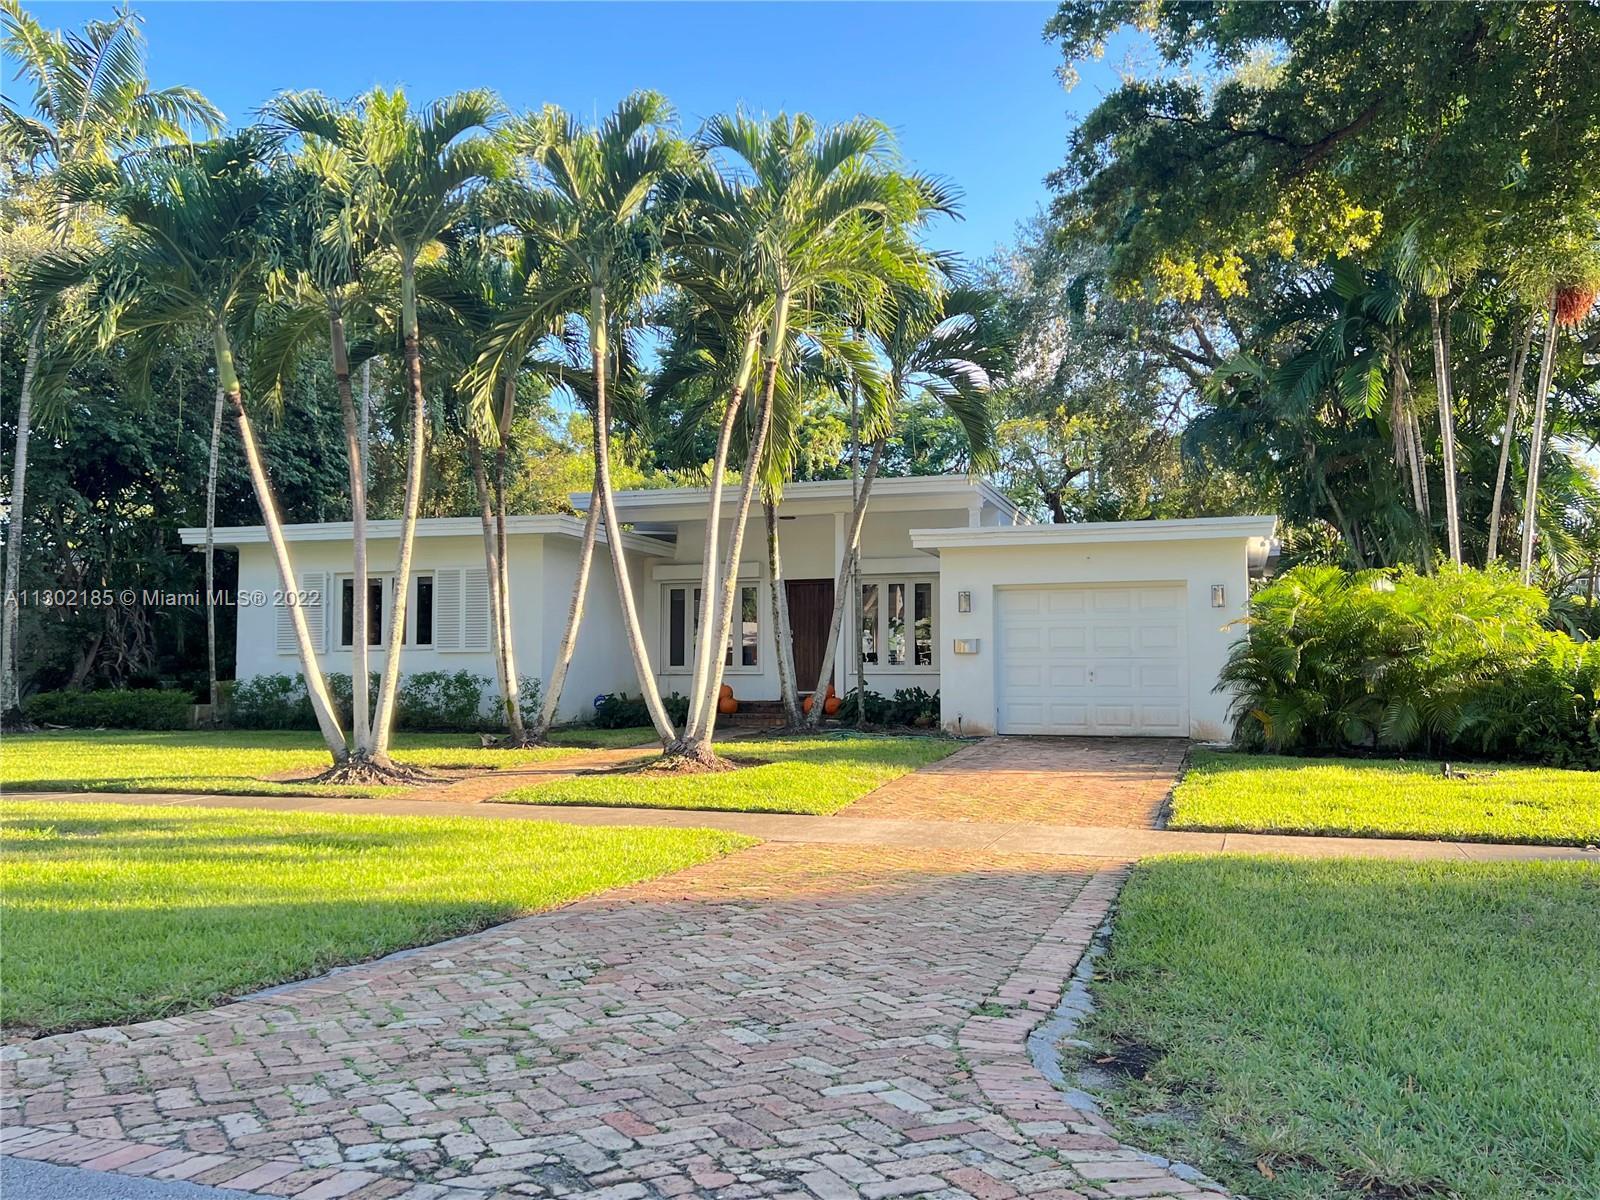 Beautifully renovated home in Miami Shores with 2 bedrooms 2 baths + converted garage that can easil